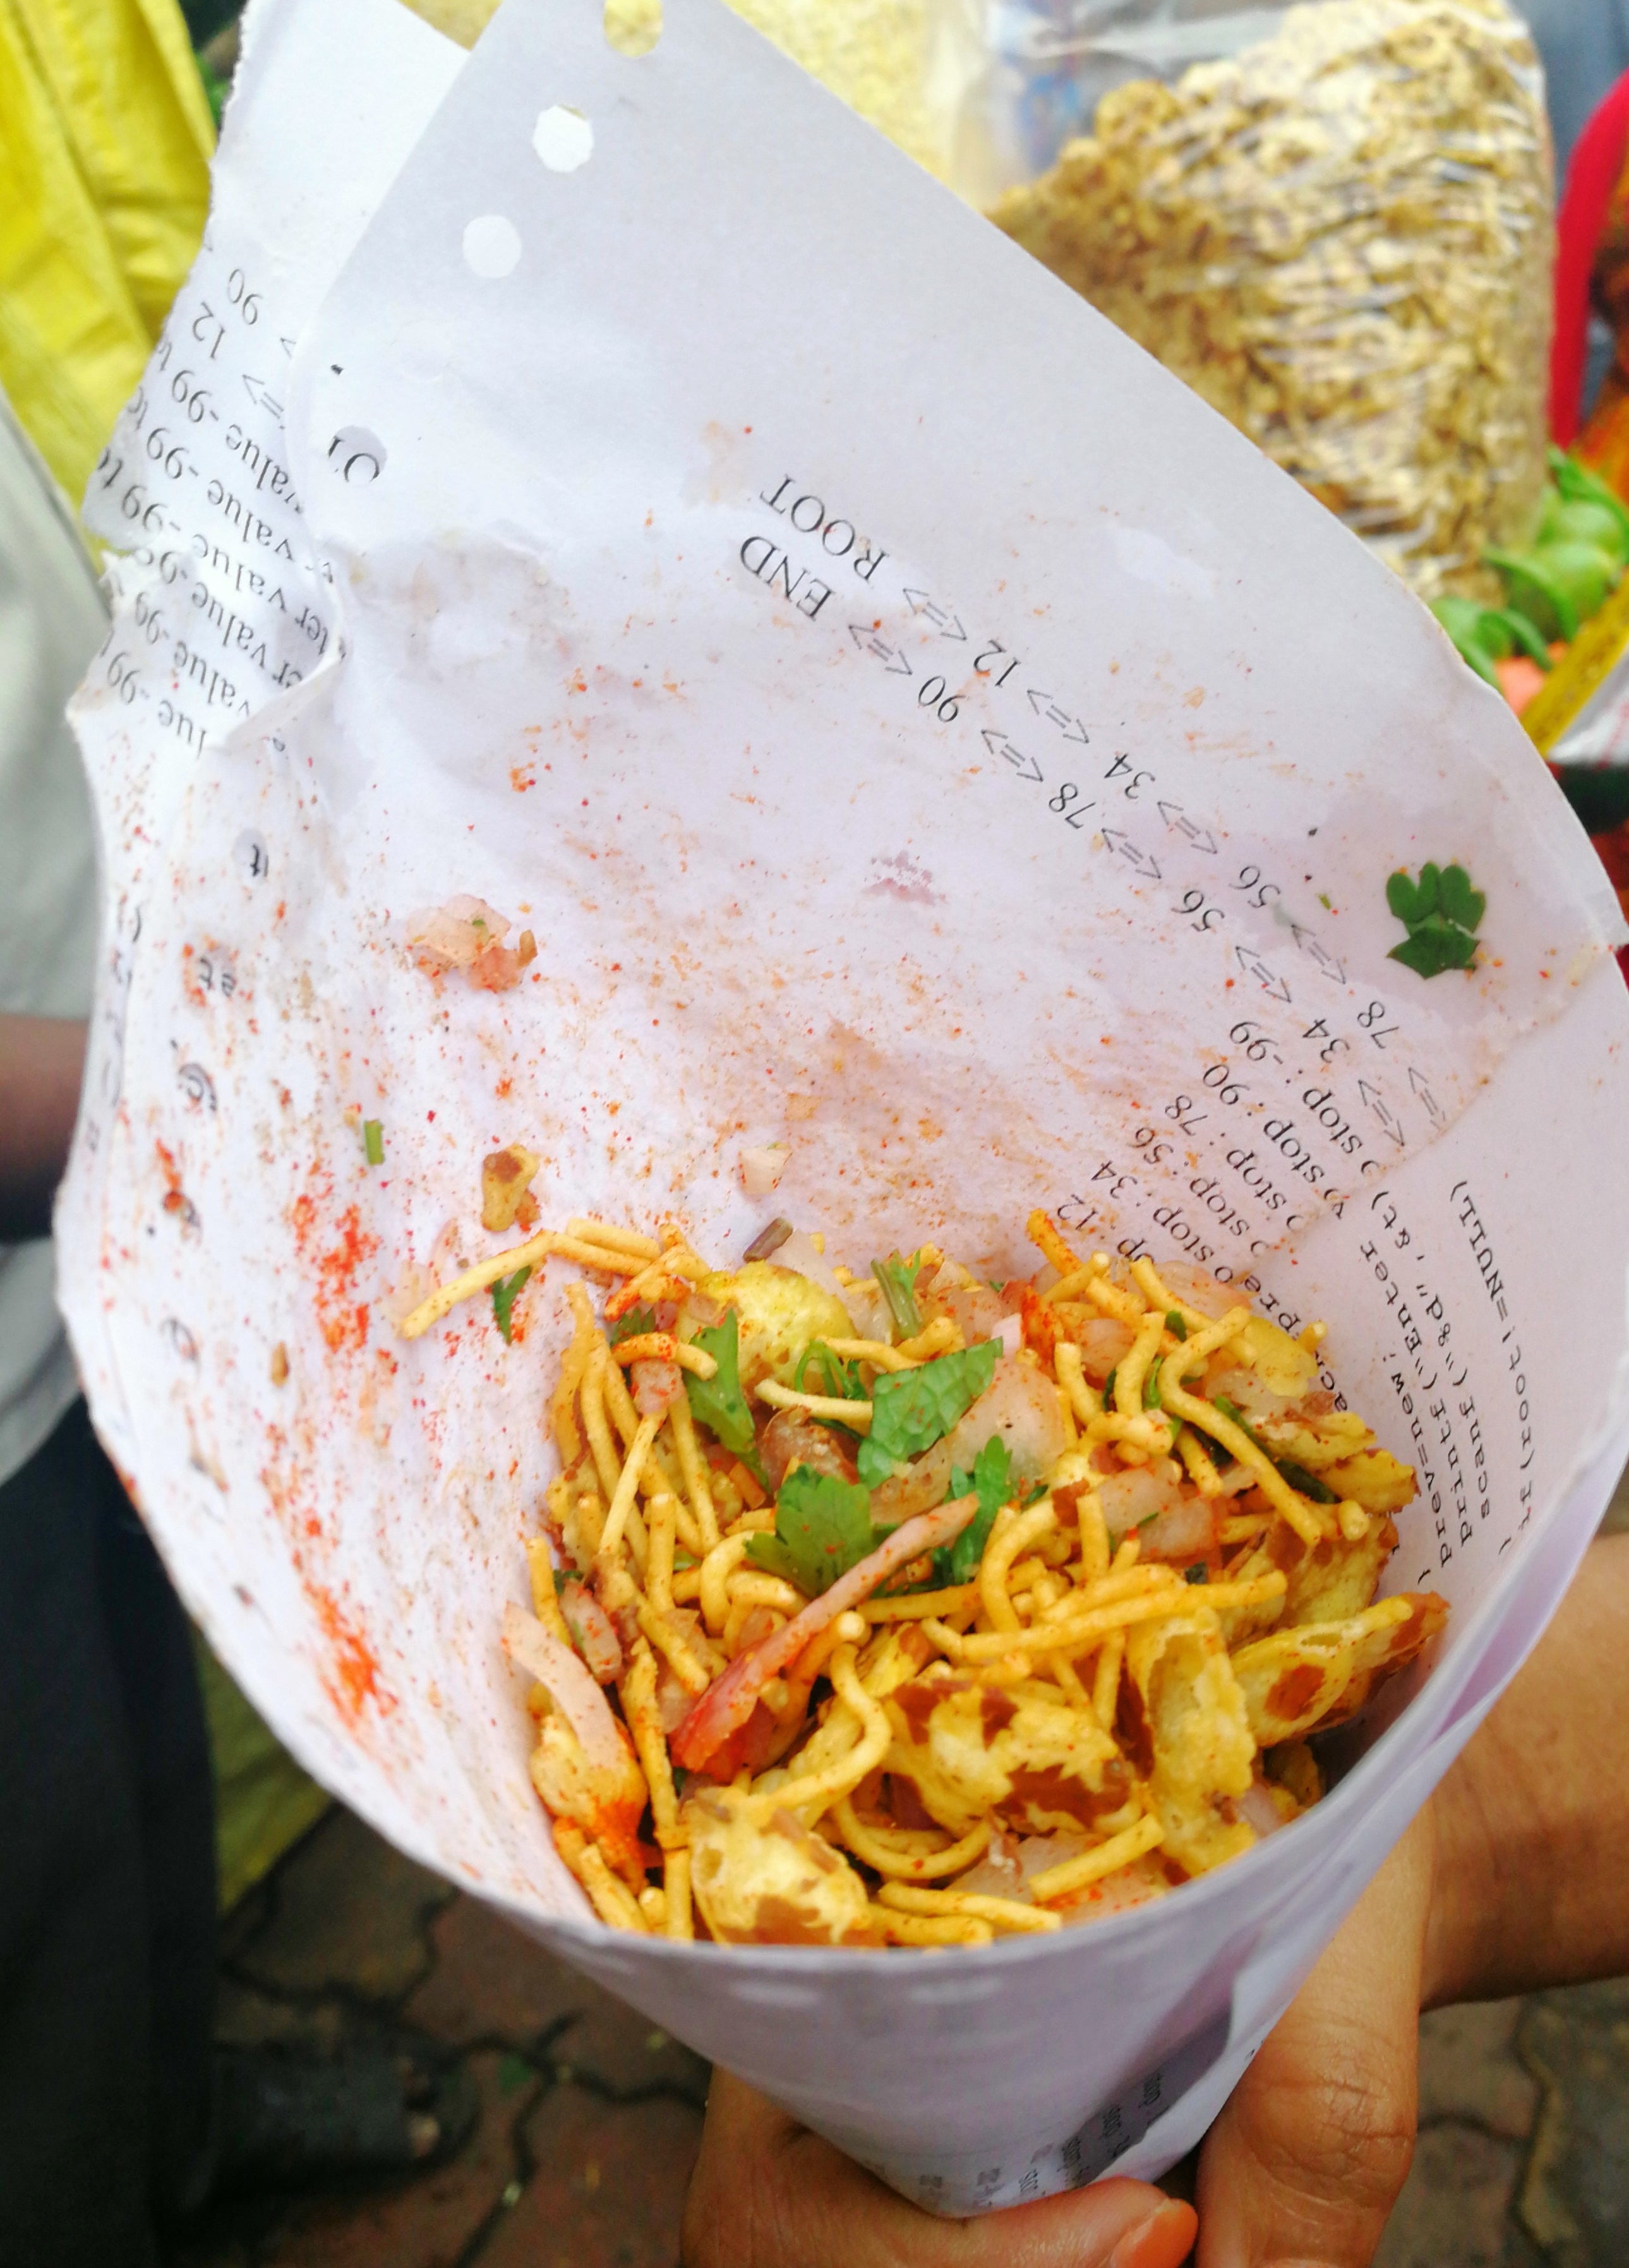 Some bhel served in a packet made out of paper